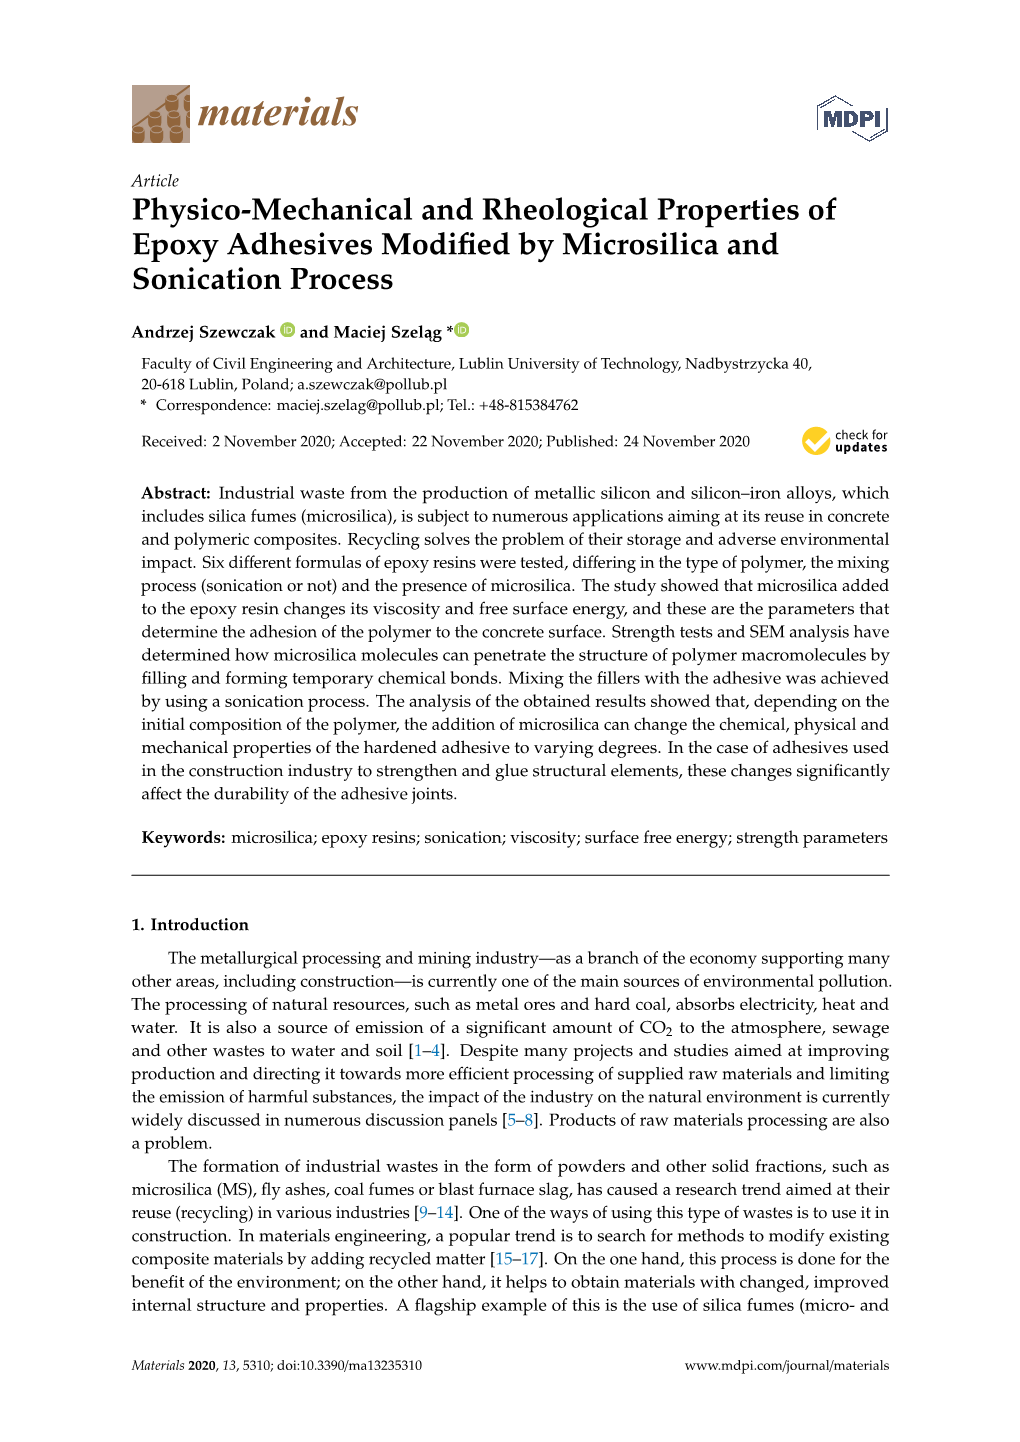 Physico-Mechanical and Rheological Properties of Epoxy Adhesives Modiﬁed by Microsilica and Sonication Process